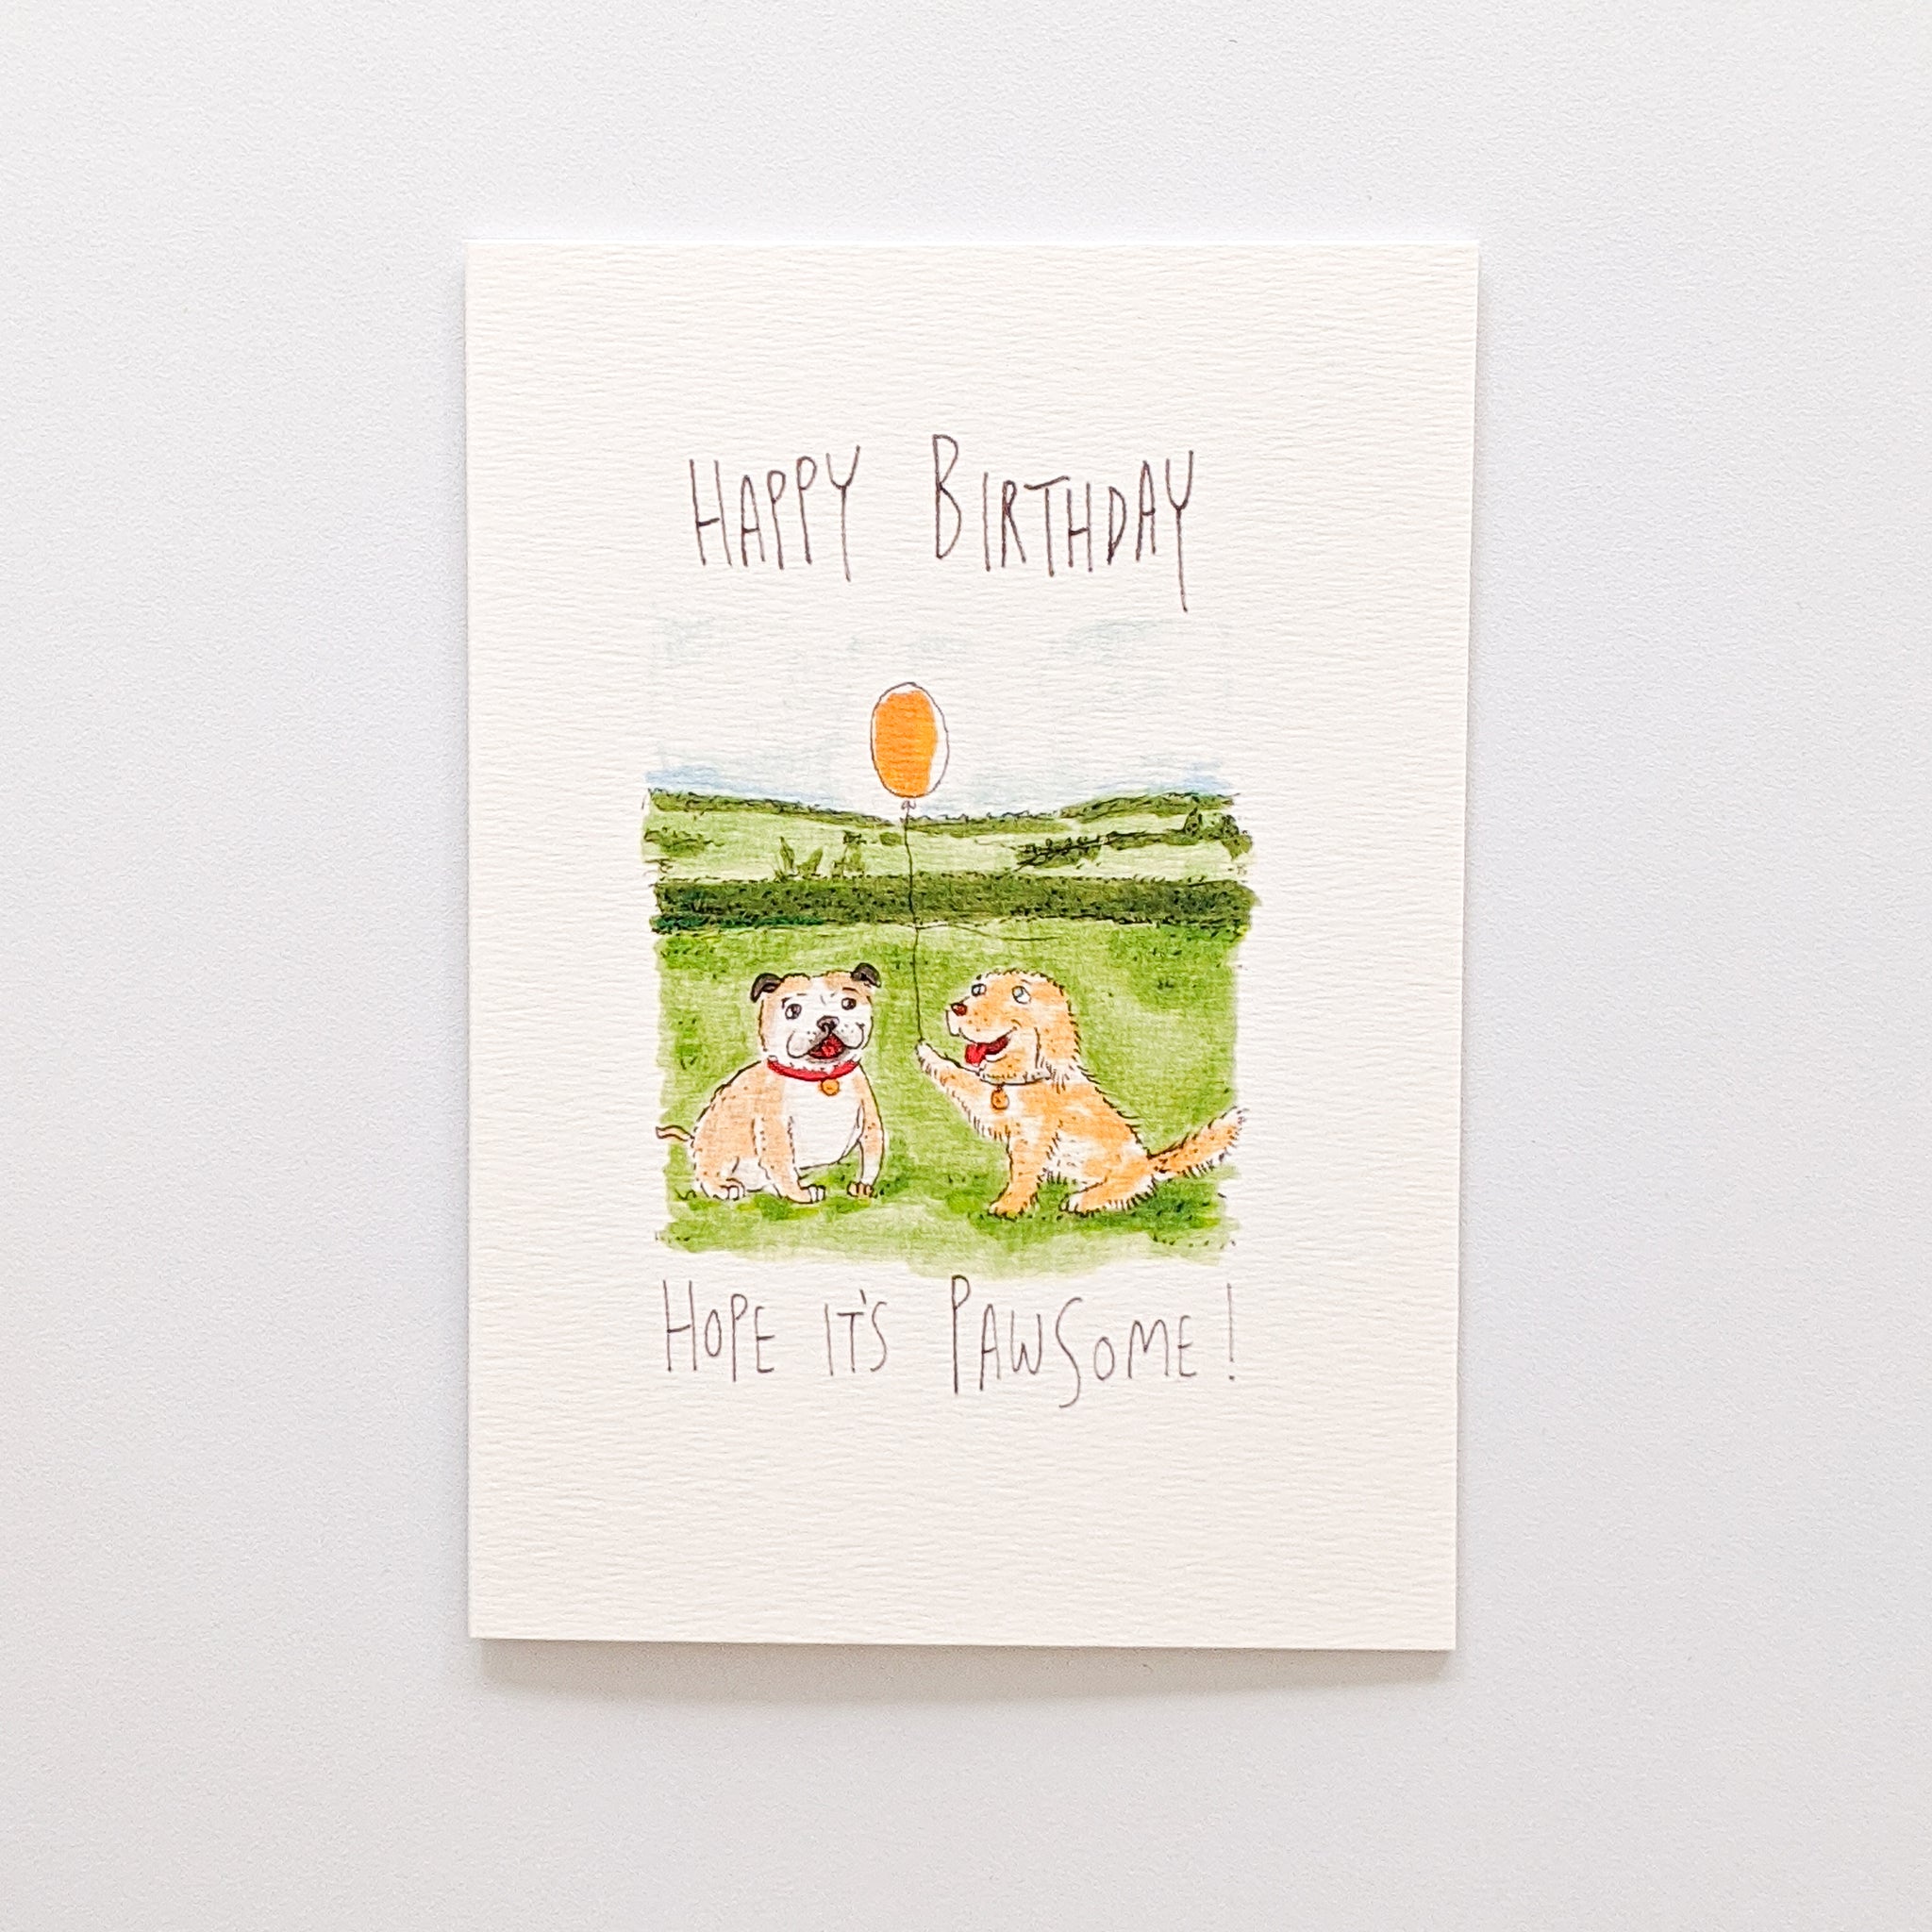 Happy Birthday, Hope its Pawesome | lovely card | hand-made card | cards